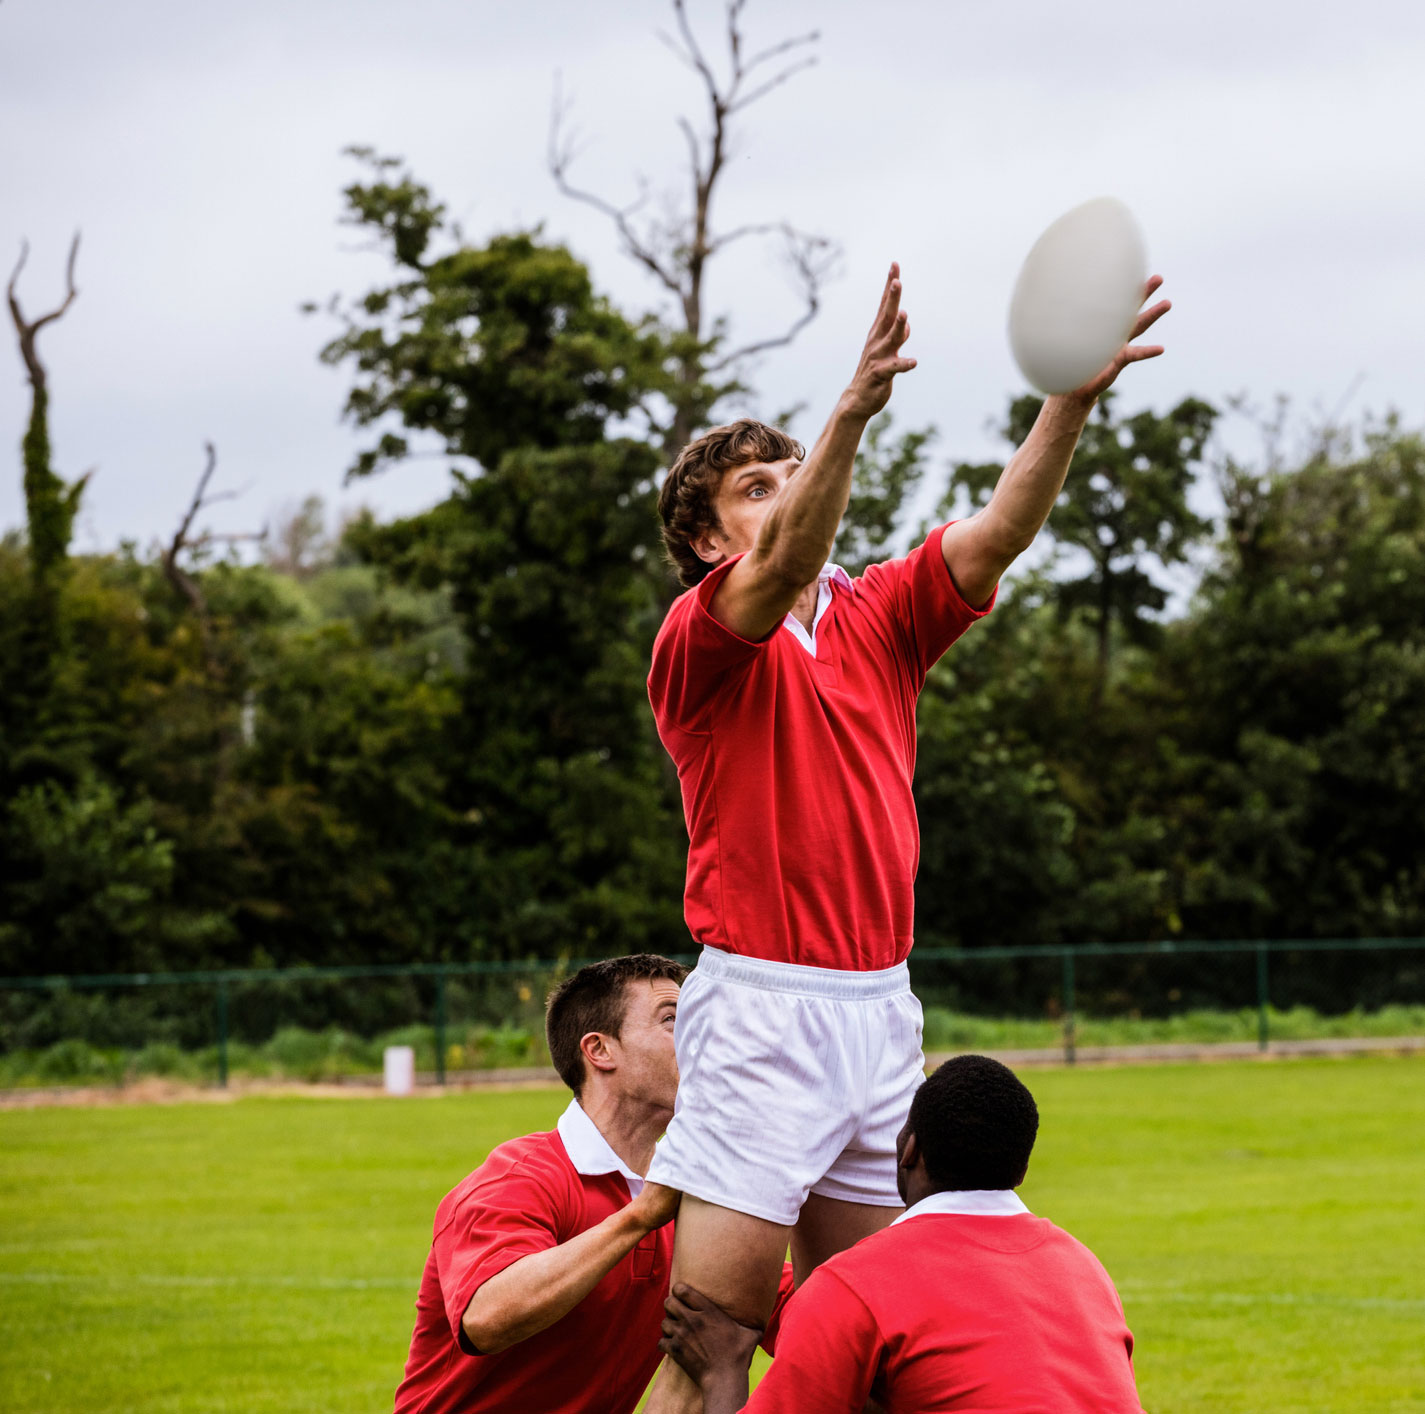 Male rugby players in a red kit with white shorts take a lineout 